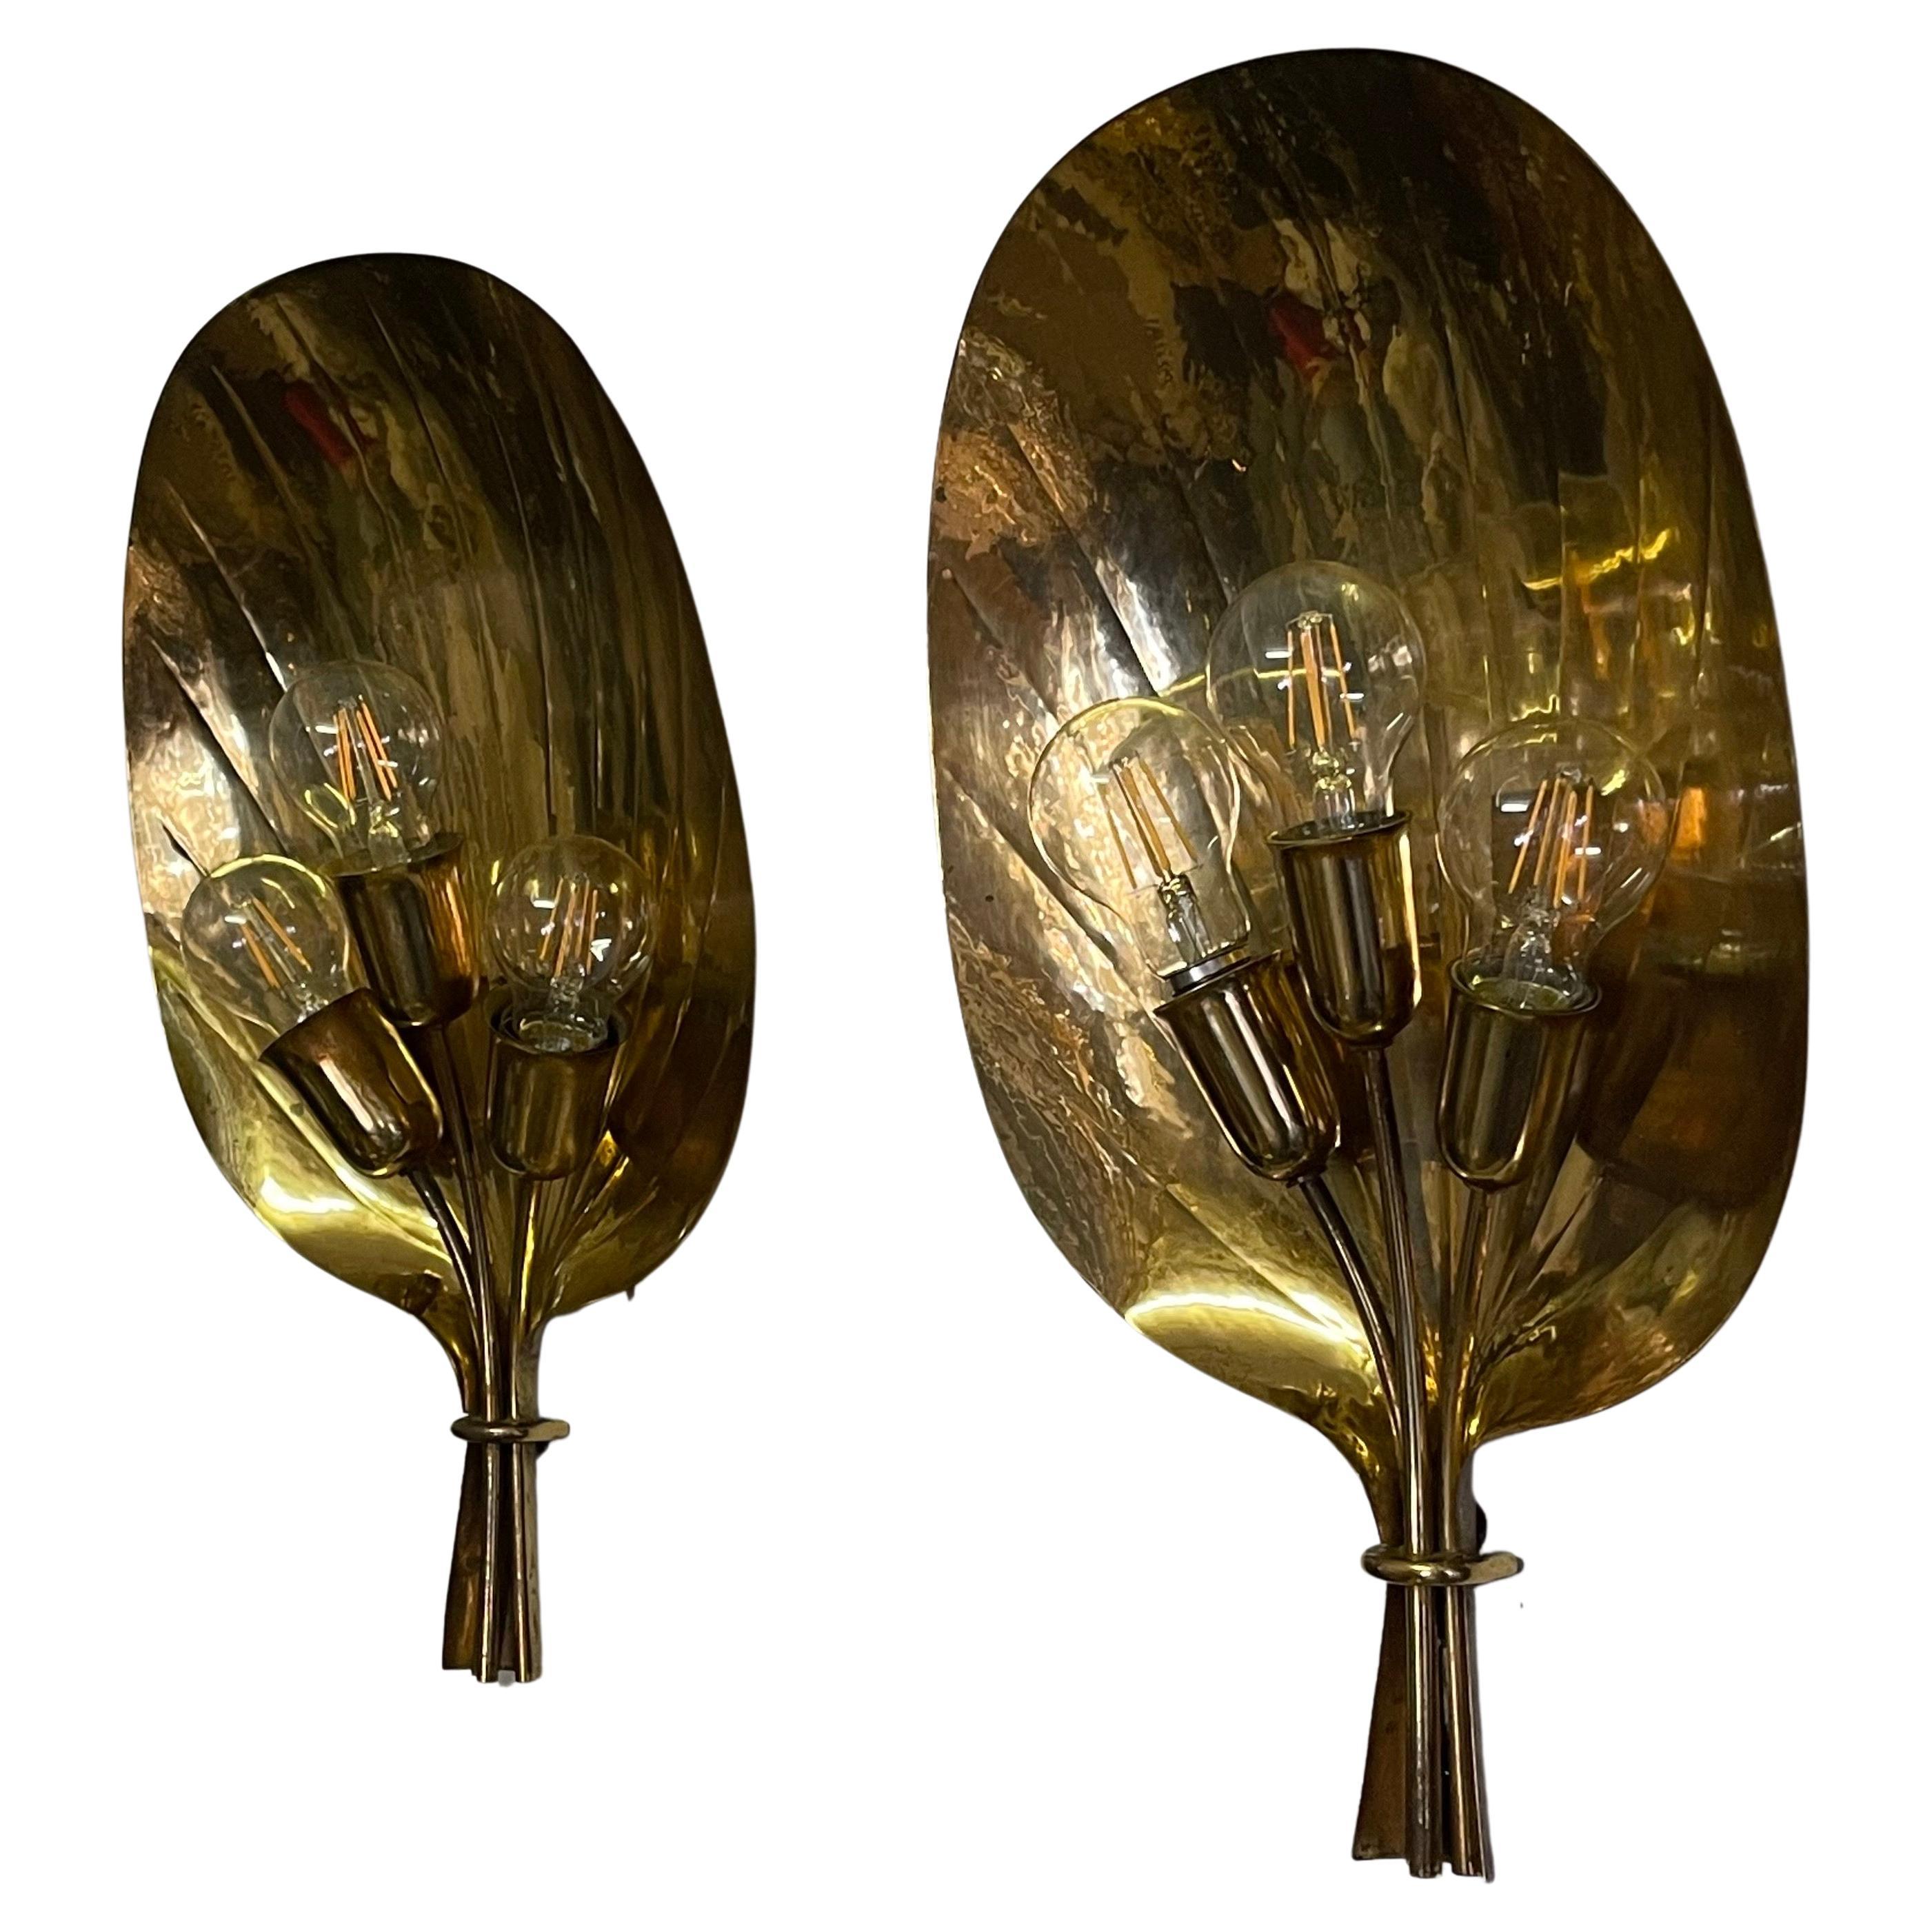 Hammered Pair of Scandinavian  Polished Brass Fan Sconces, circa 1950s